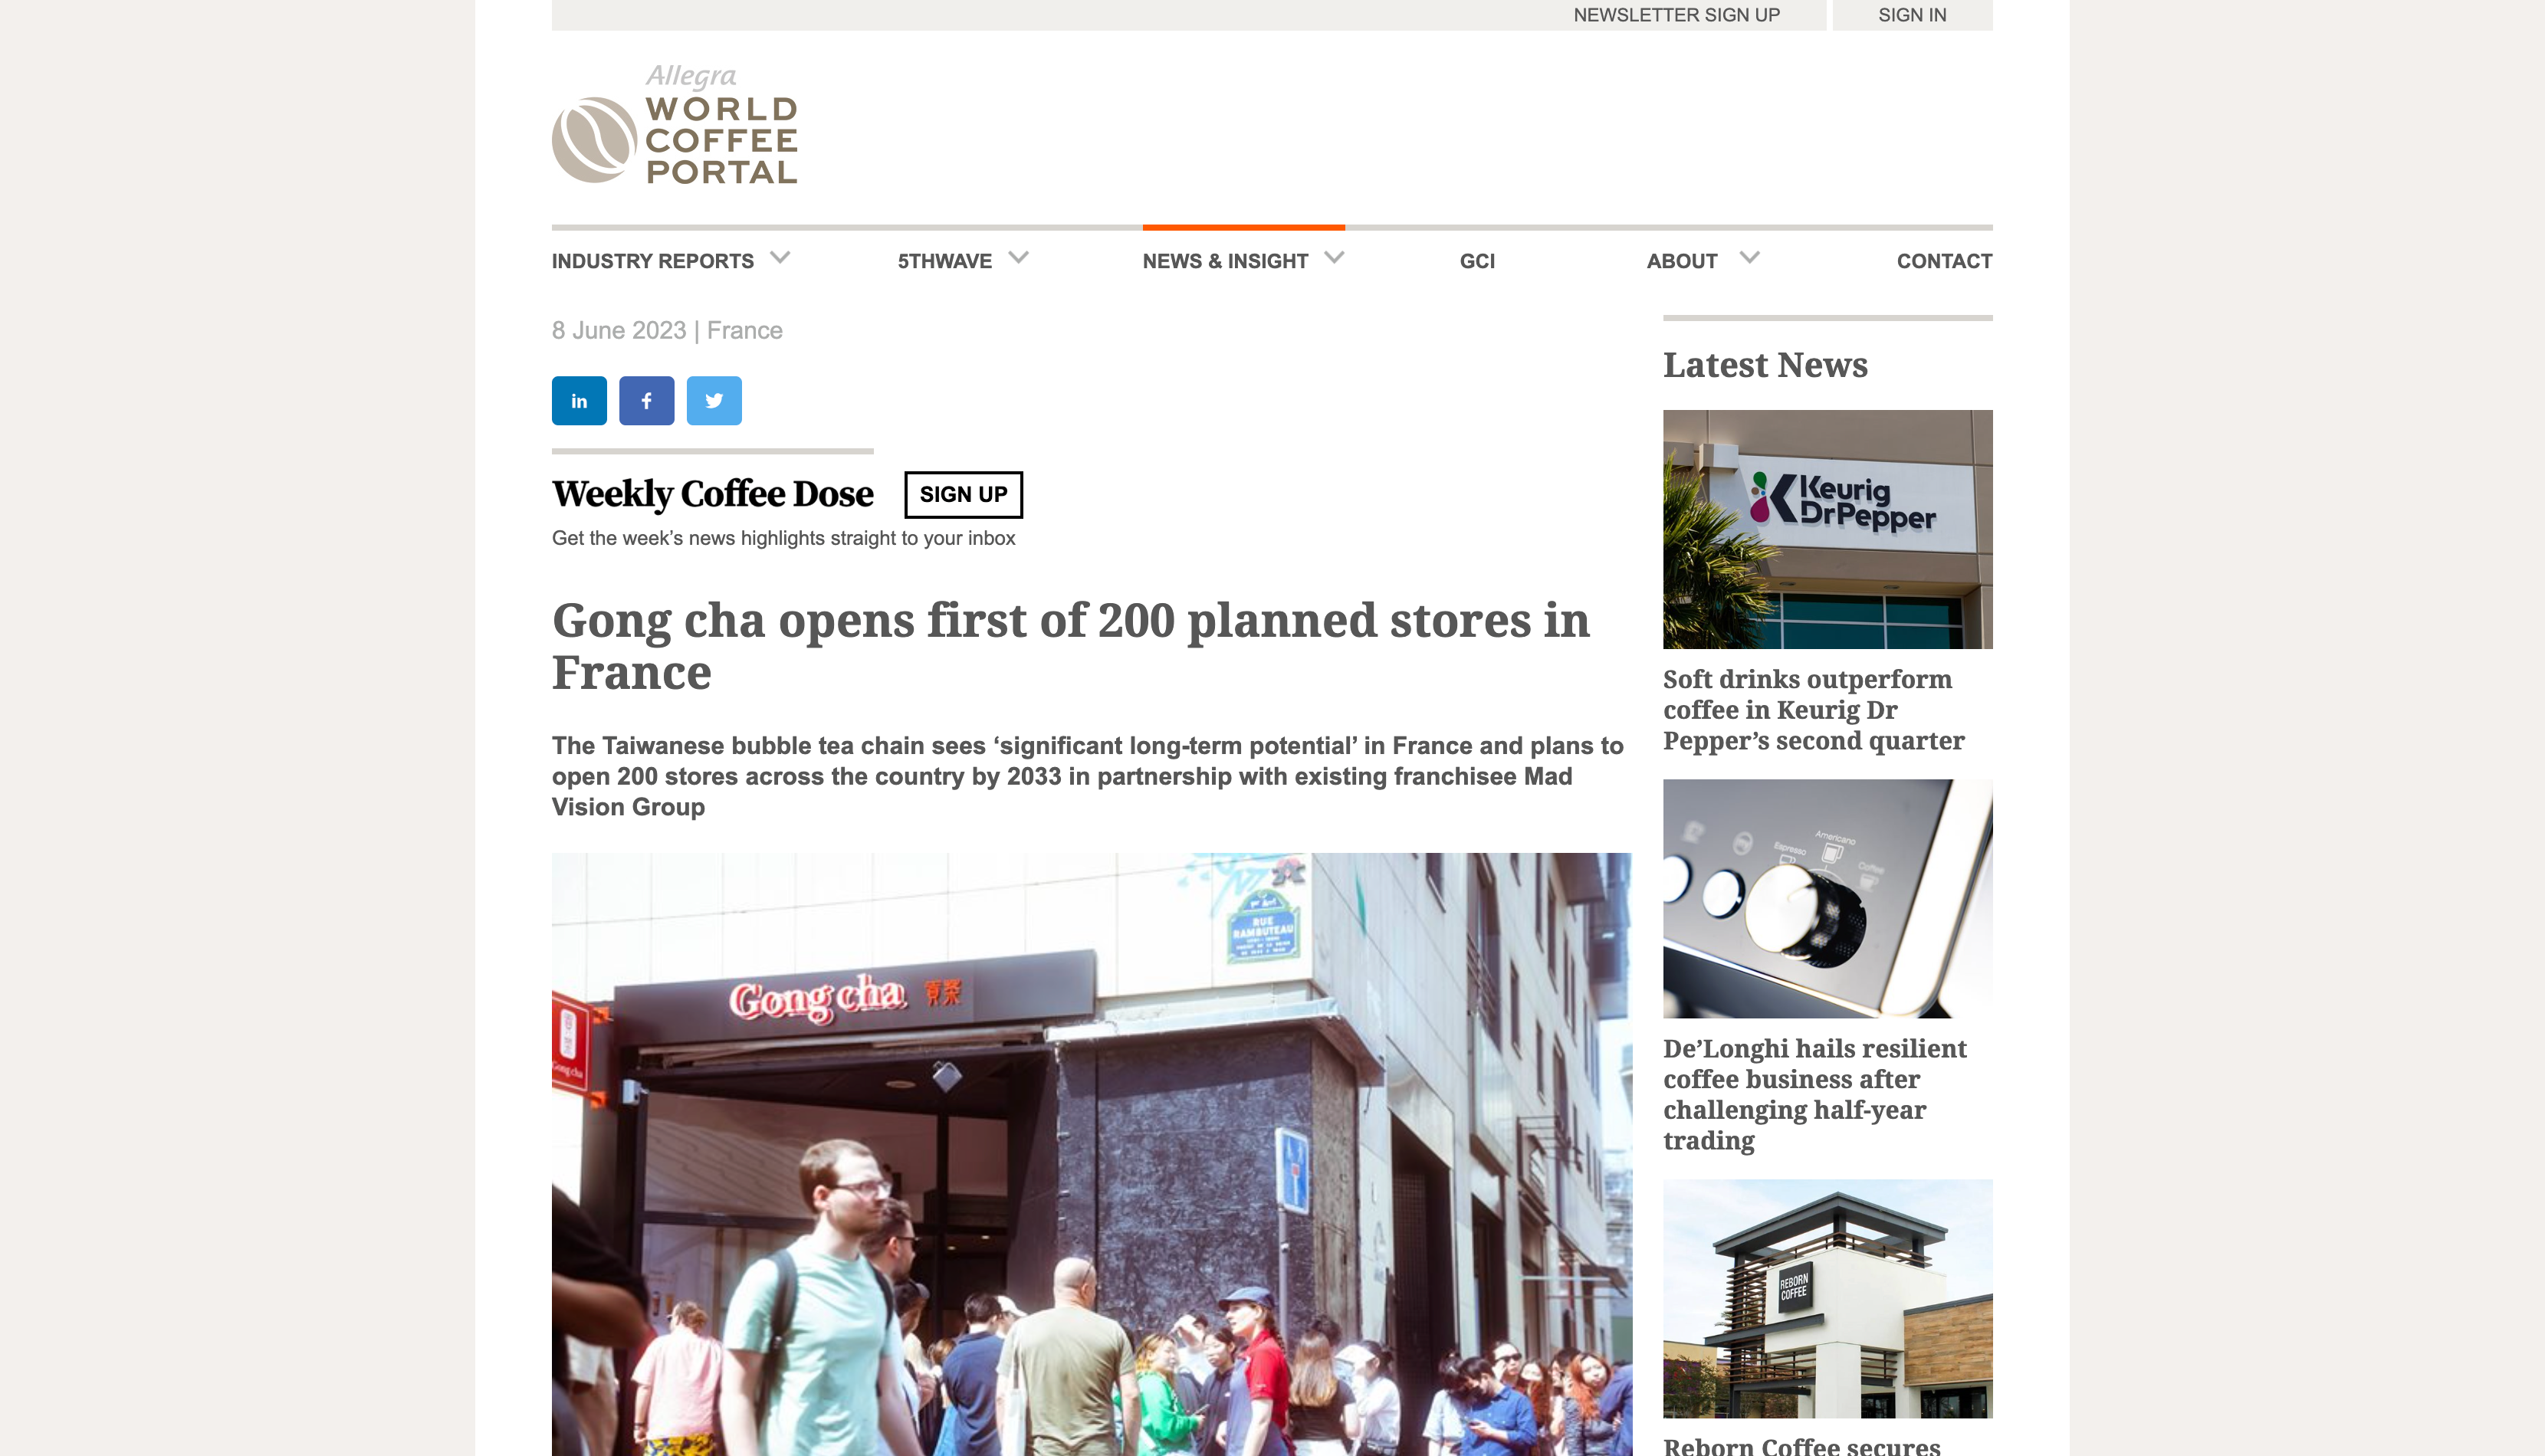 Gong-cha-opens-first-of-200-planned-stores-in-France-World-Coffee-Portal